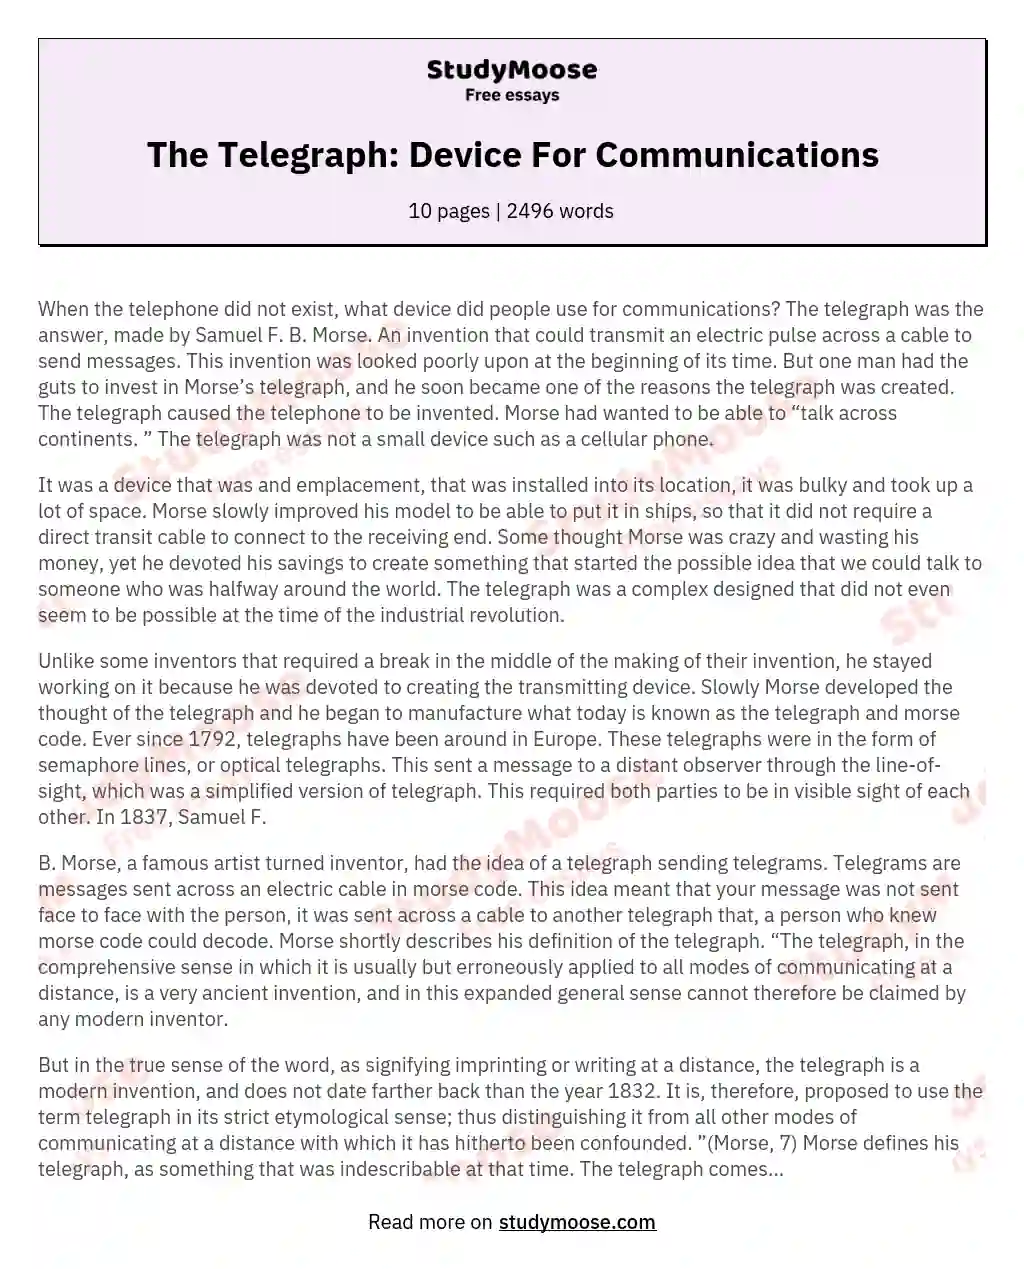 The Telegraph: Device For Communications essay